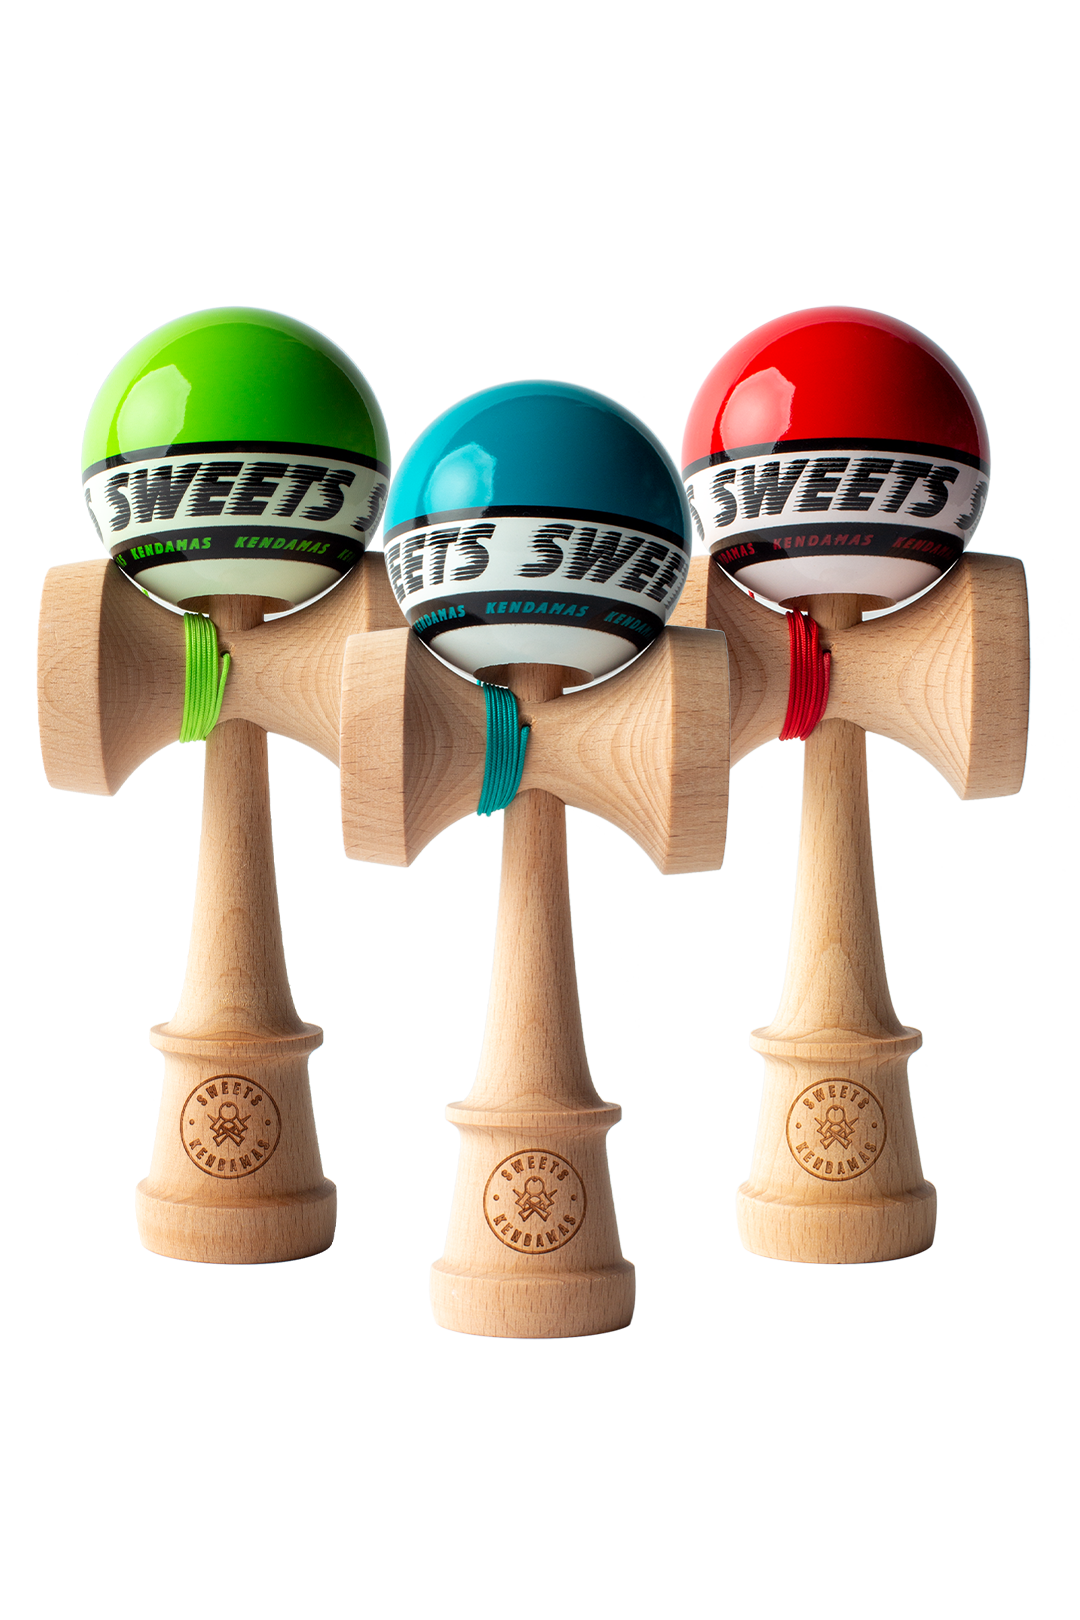 SWEETS STARTER - THREE PACK (Green, Teal, Red)